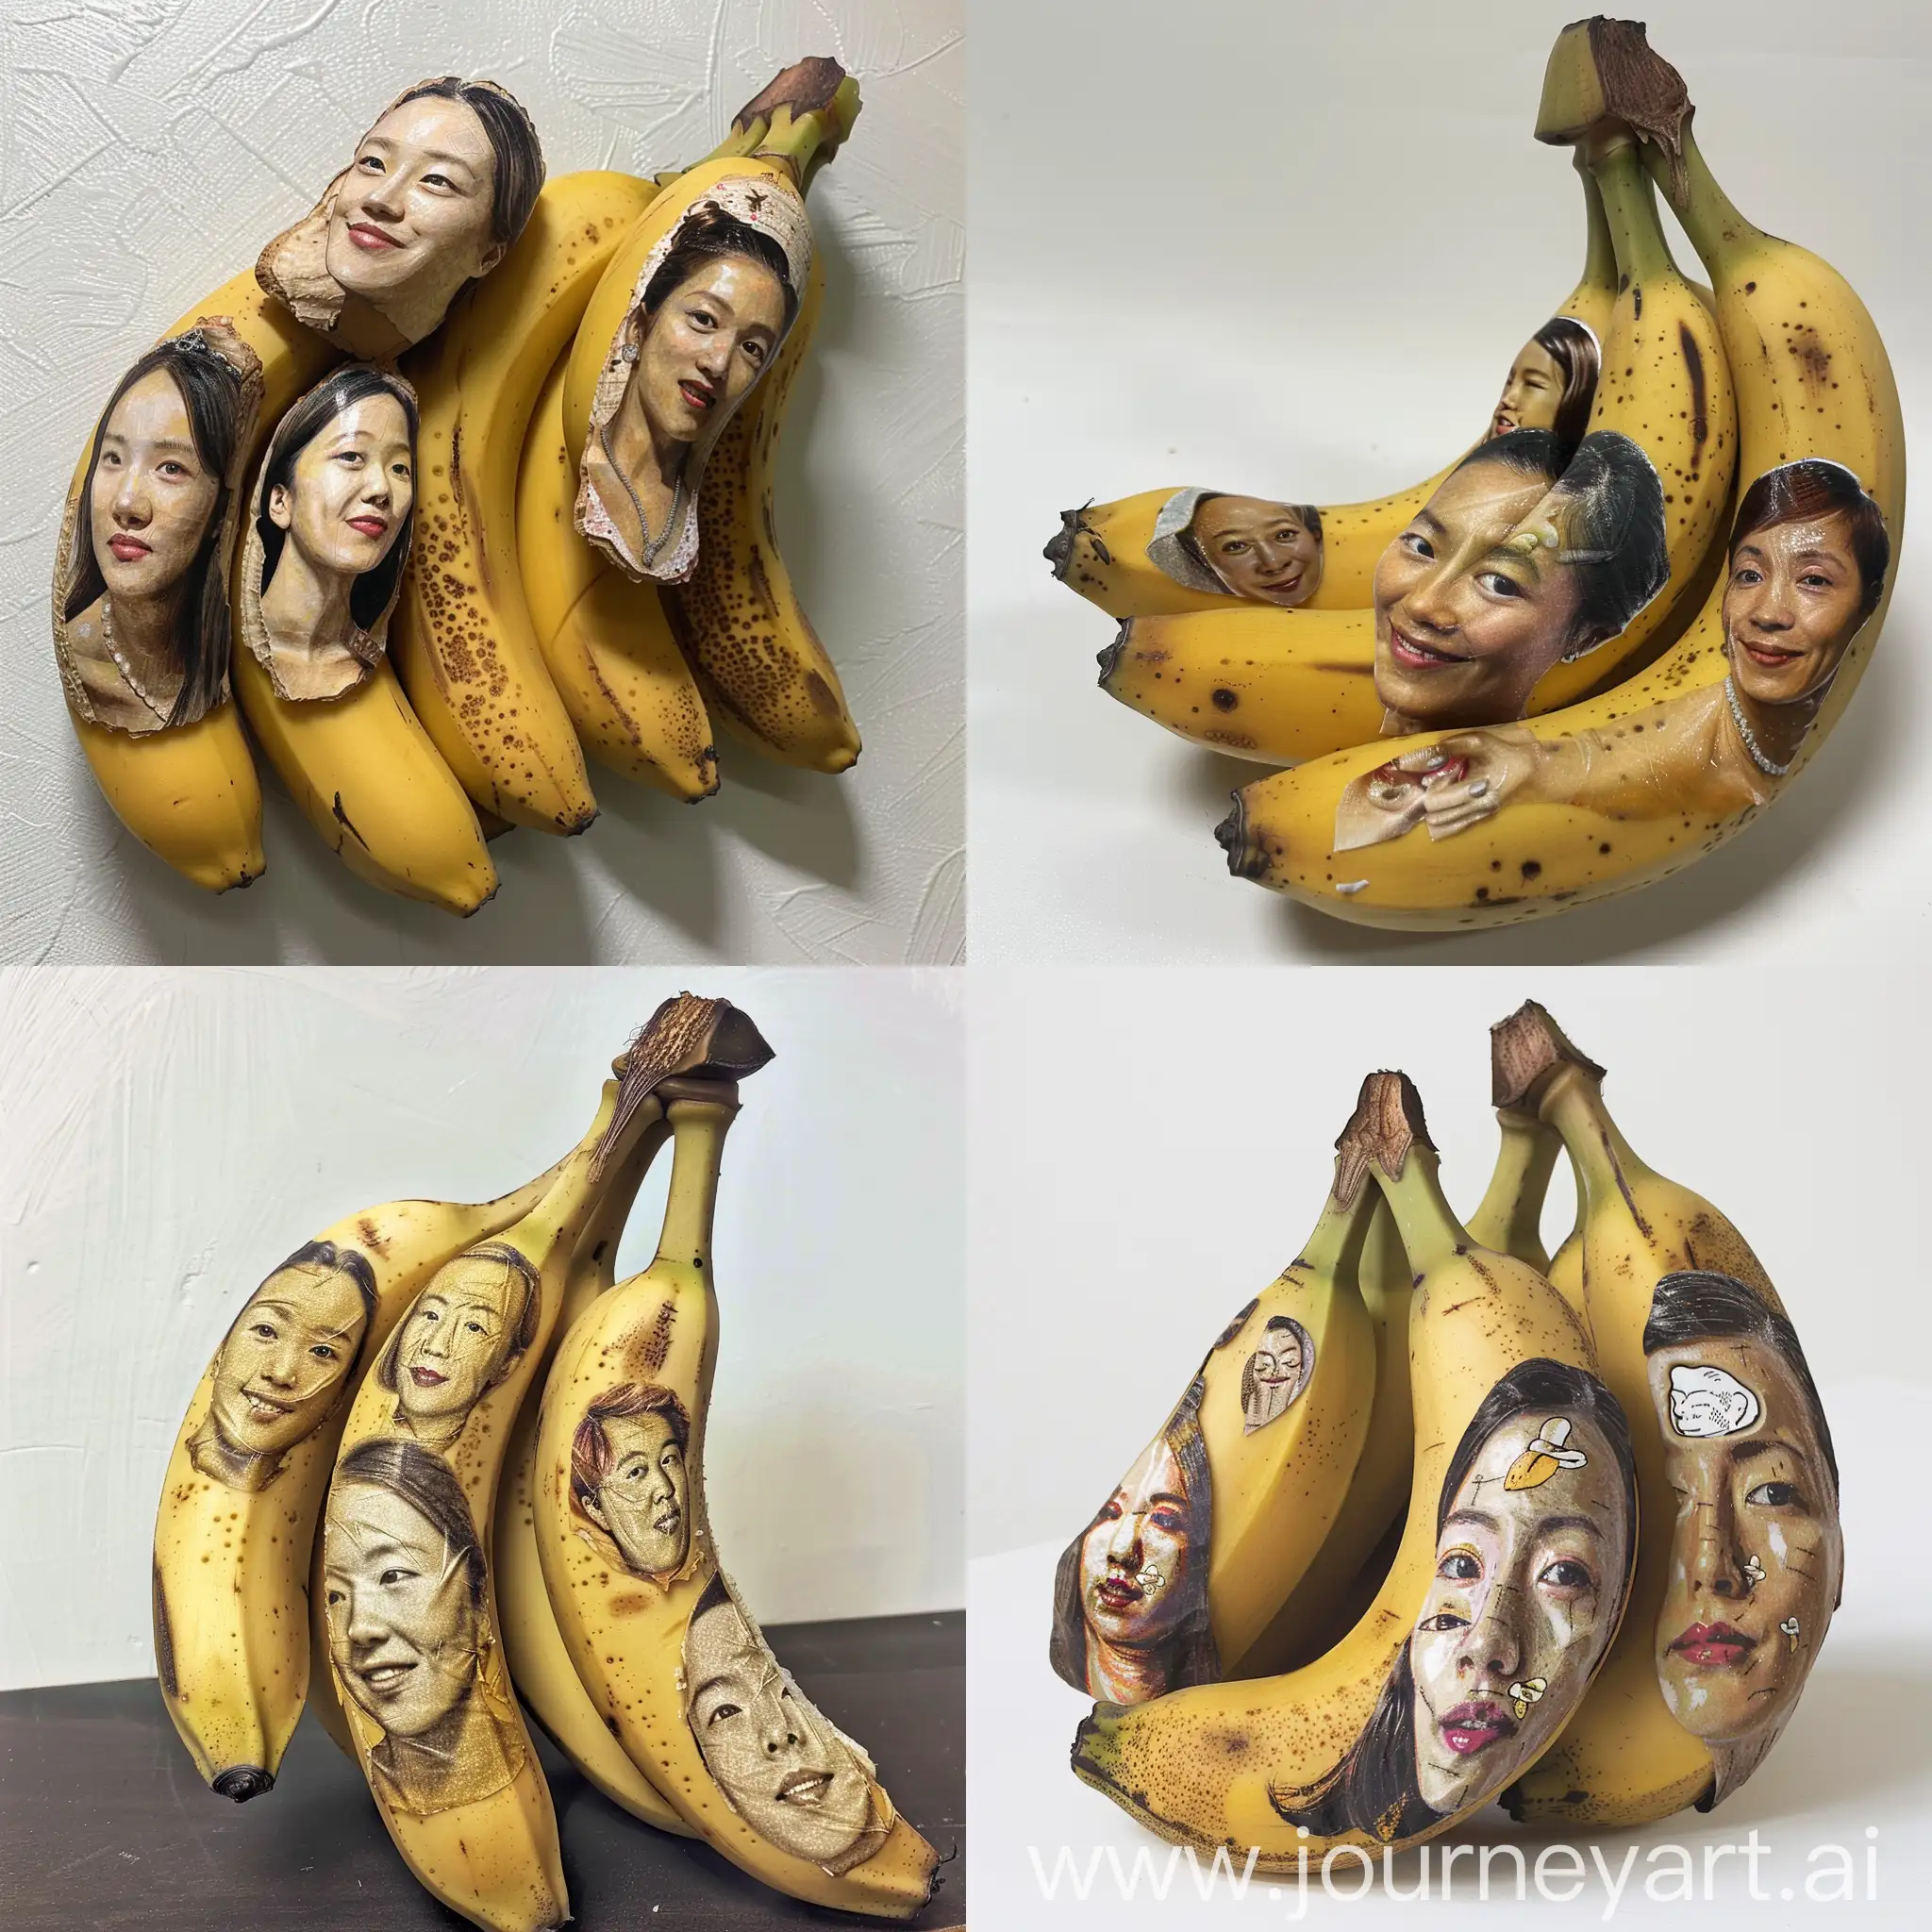 Bananas-with-Human-Faces-Taiwanese-and-French-Characters-in-Fruit-Form